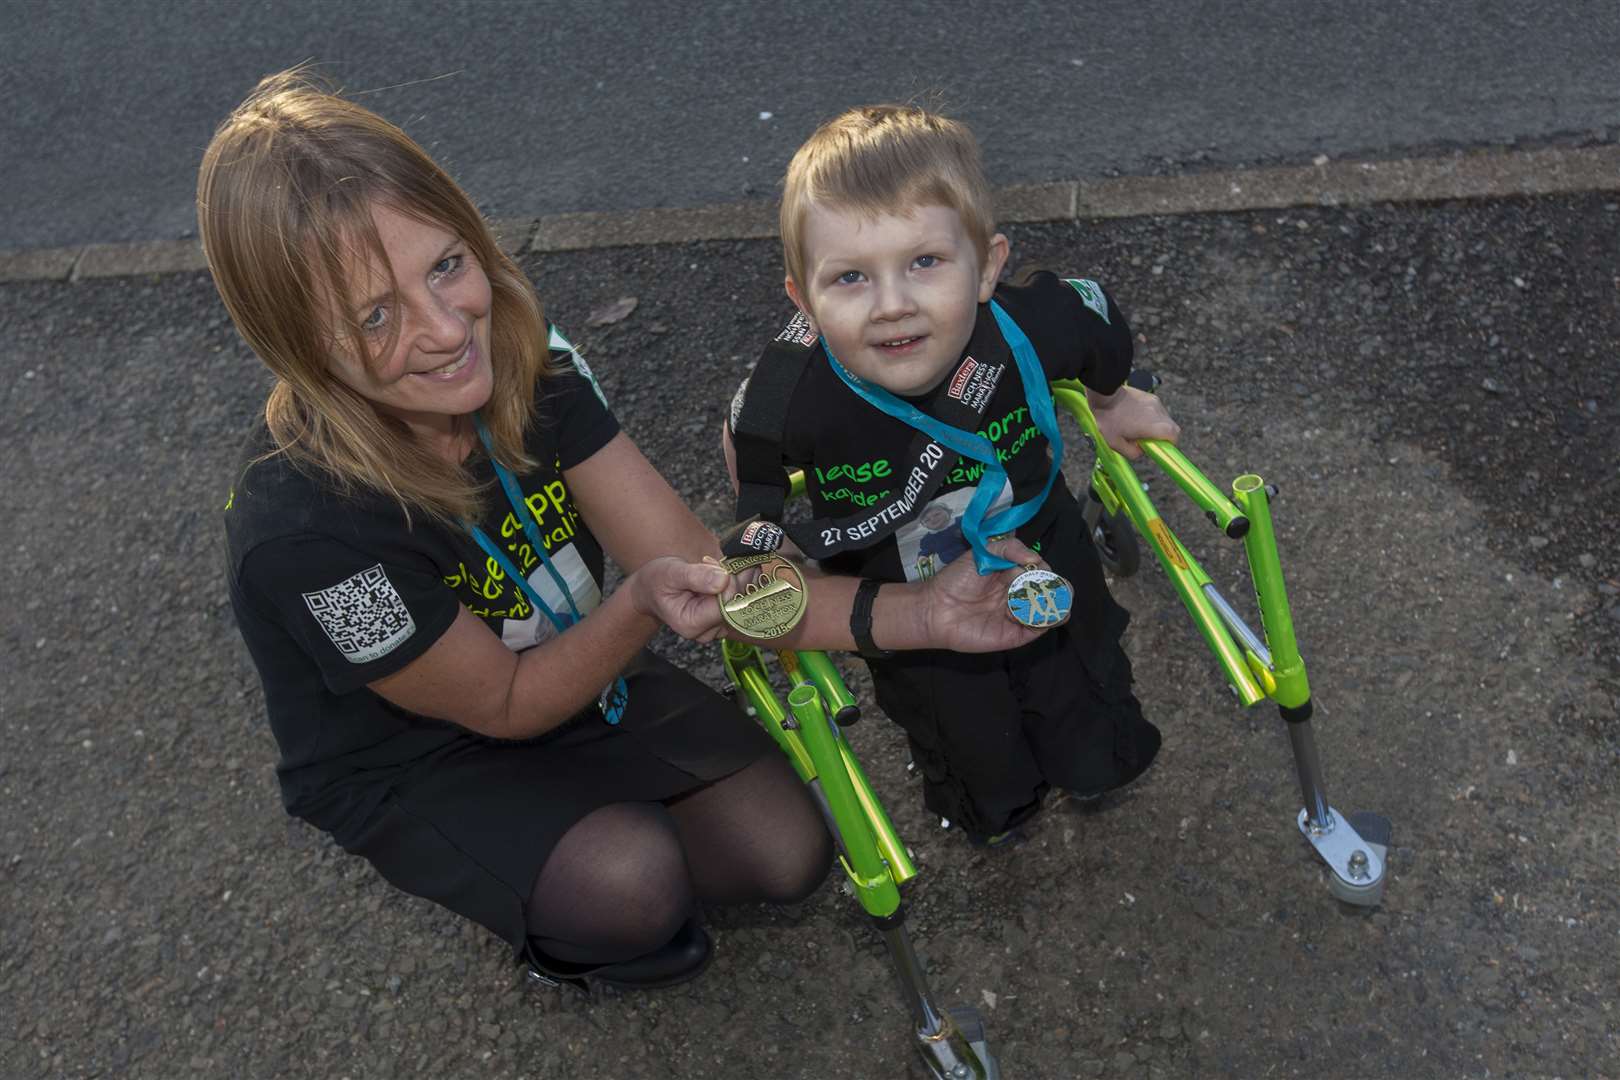 In September 2015, Kayden Malcolm got his first medal when endurance athlete Lorna Stanger presented him with the one she received at the Aviemore Half Marathon. On Sunday, Kayden received his first medal in his own right when he took part in the Mey Mile. Picture: Robert MacDonald / Northern Studios